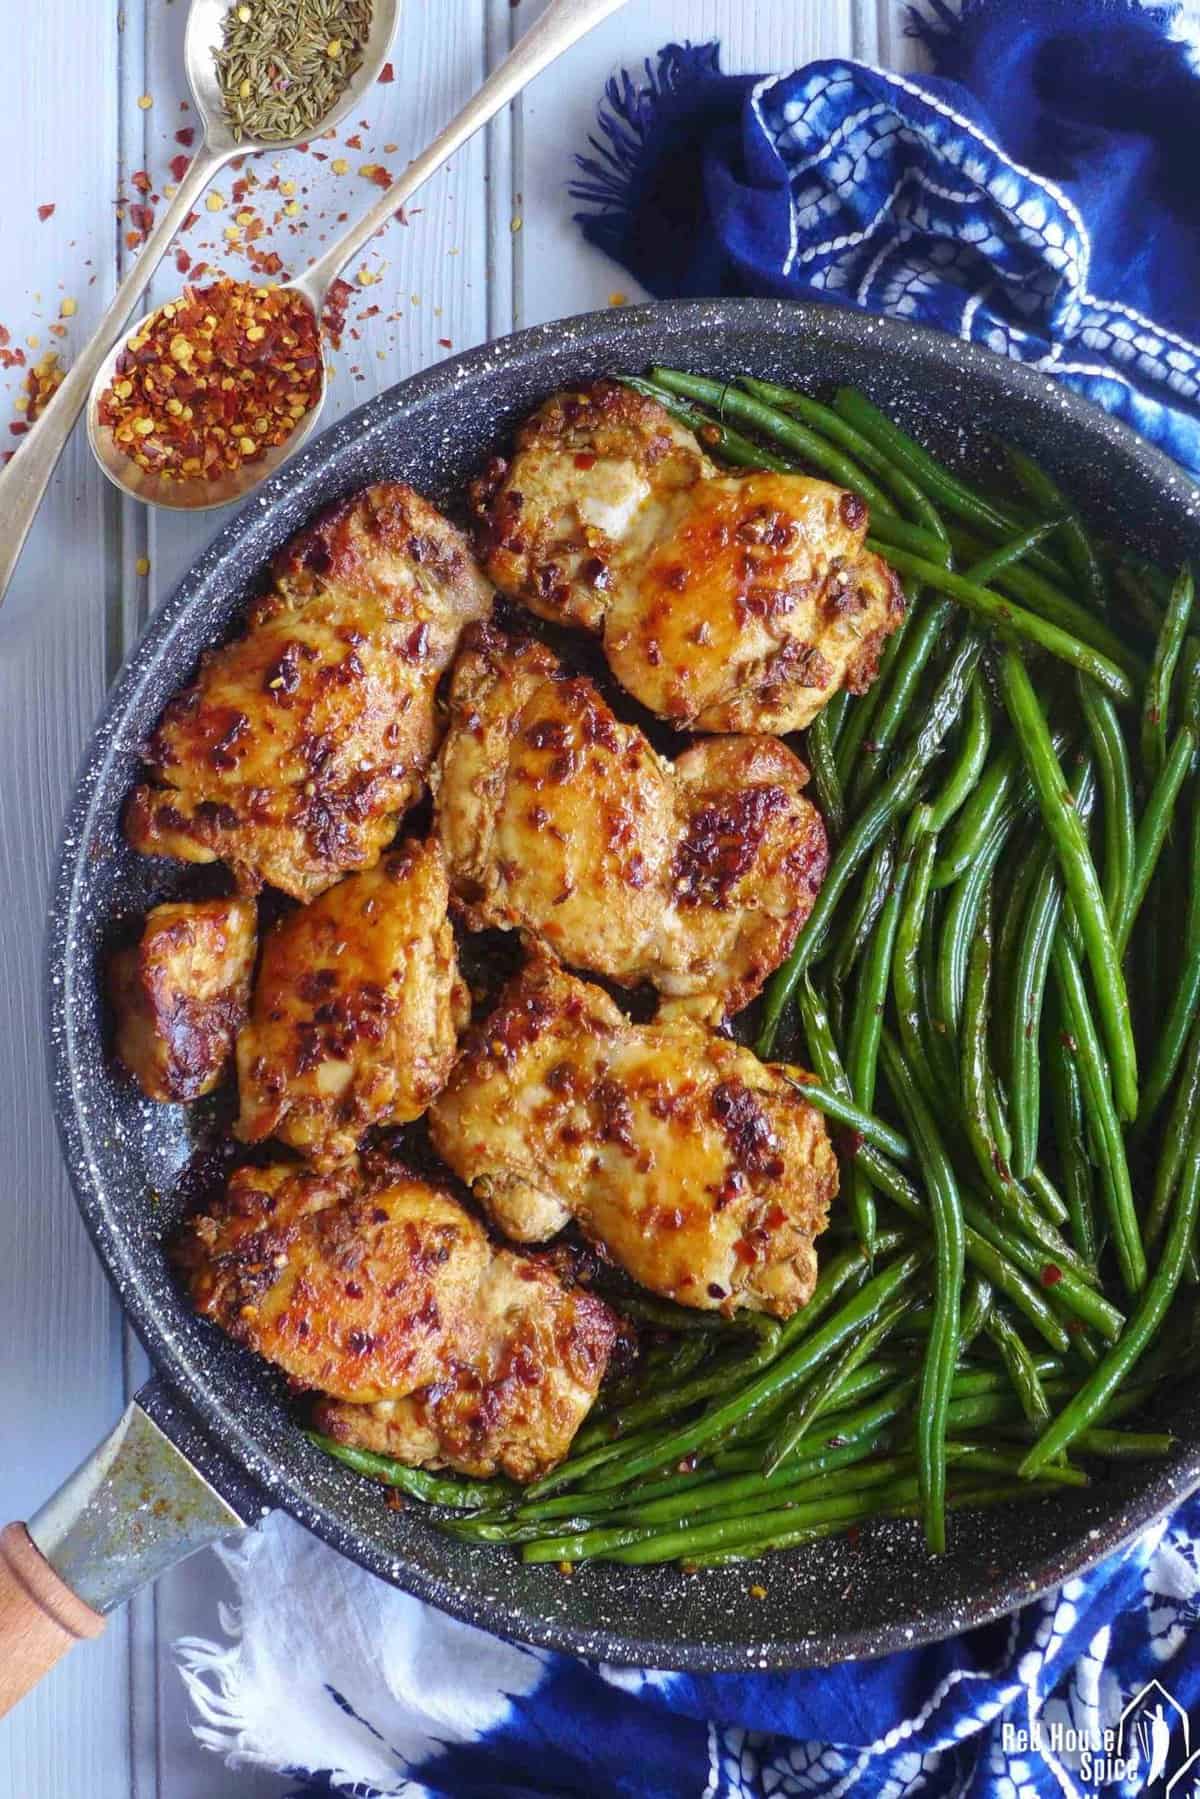 Chili Cumin Chicken Thighs - Red House Spice